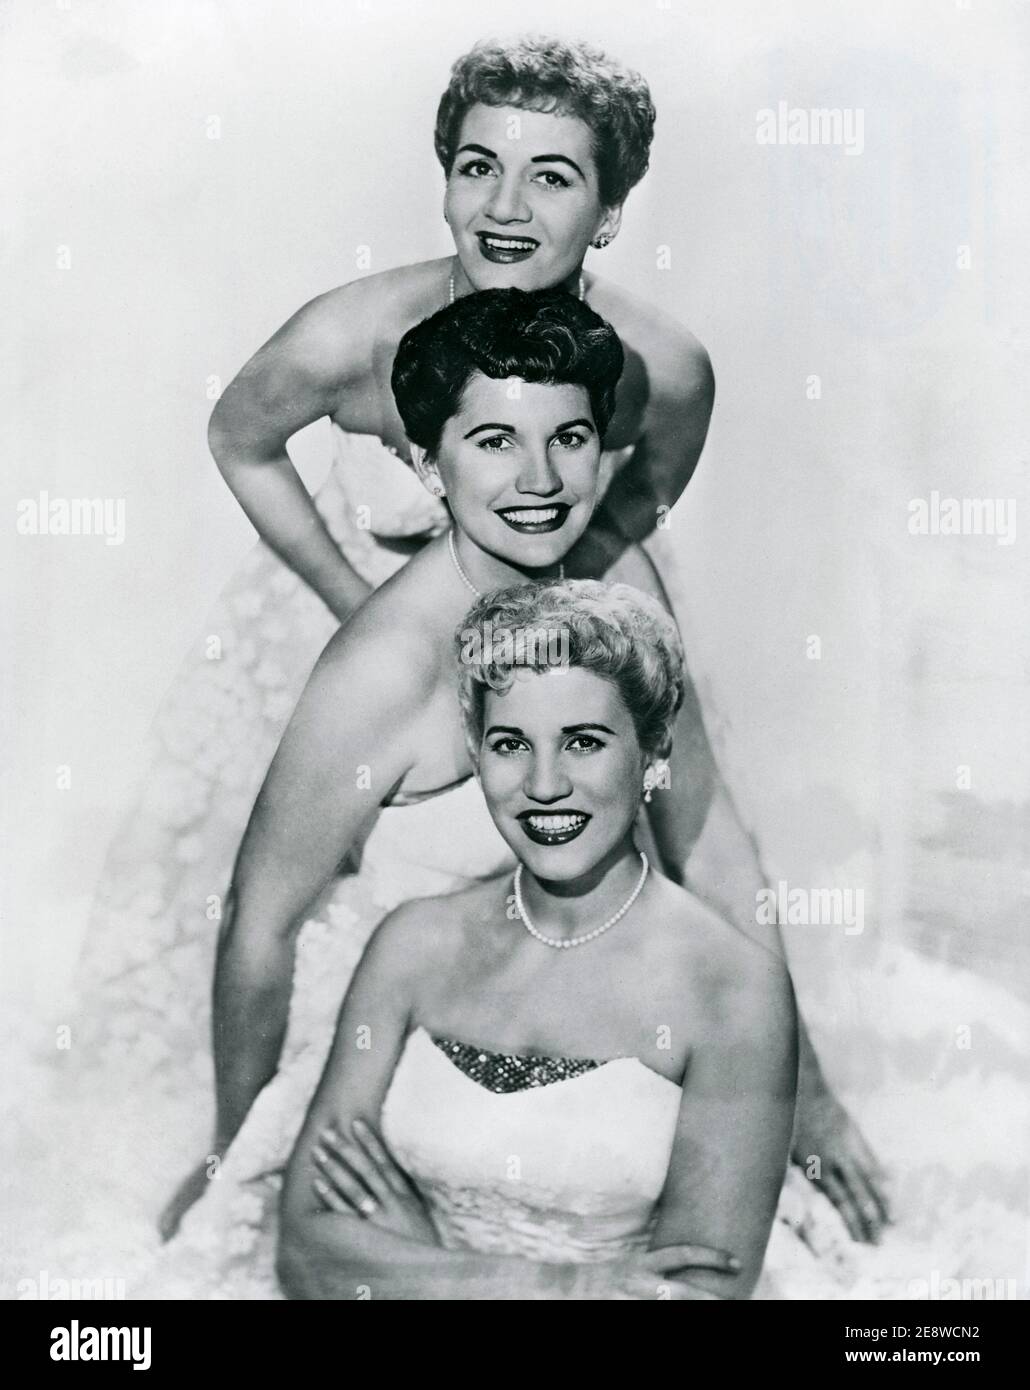 The Andrew Sisters. An American close harmony singing group of the swing and boogie-woogie eras. The group consisted of three sisters: contralto LaVerne Sophia (July 6, 1911 – May 8, 1967), soprano Maxene Anglyn (January 3, 1916 – October 21, 1995), and mezzo-soprano Patricia Marie 'Patty' (February 16, 1918 – January 30, 2013). One of their biggest hits is Rum and Coca Cola.  Pictured here in 1957. Stock Photo